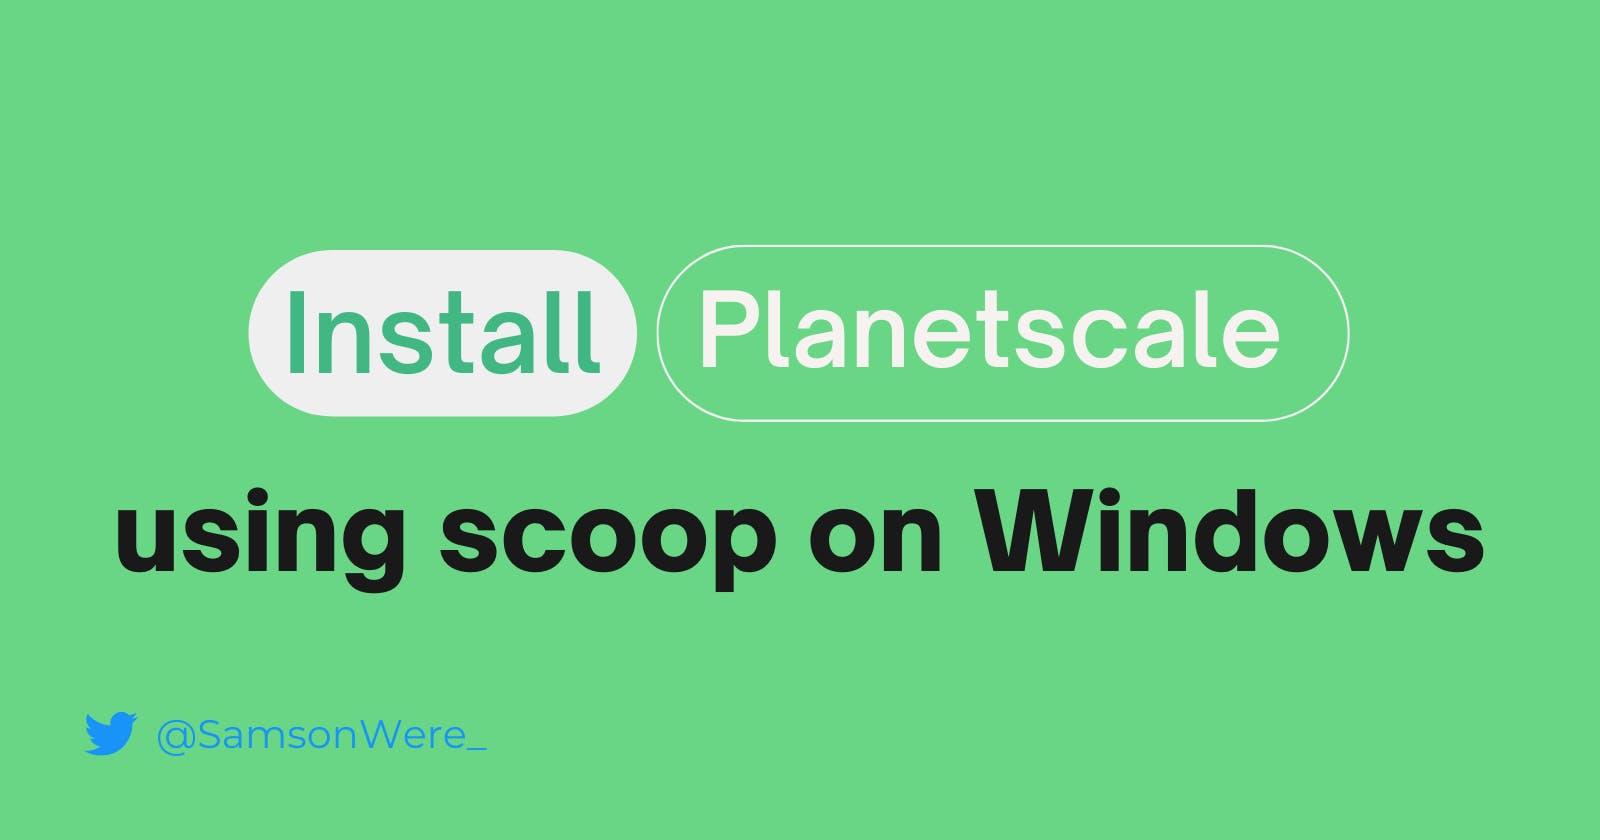 How to Install Planetscale using Scoop on Windows.